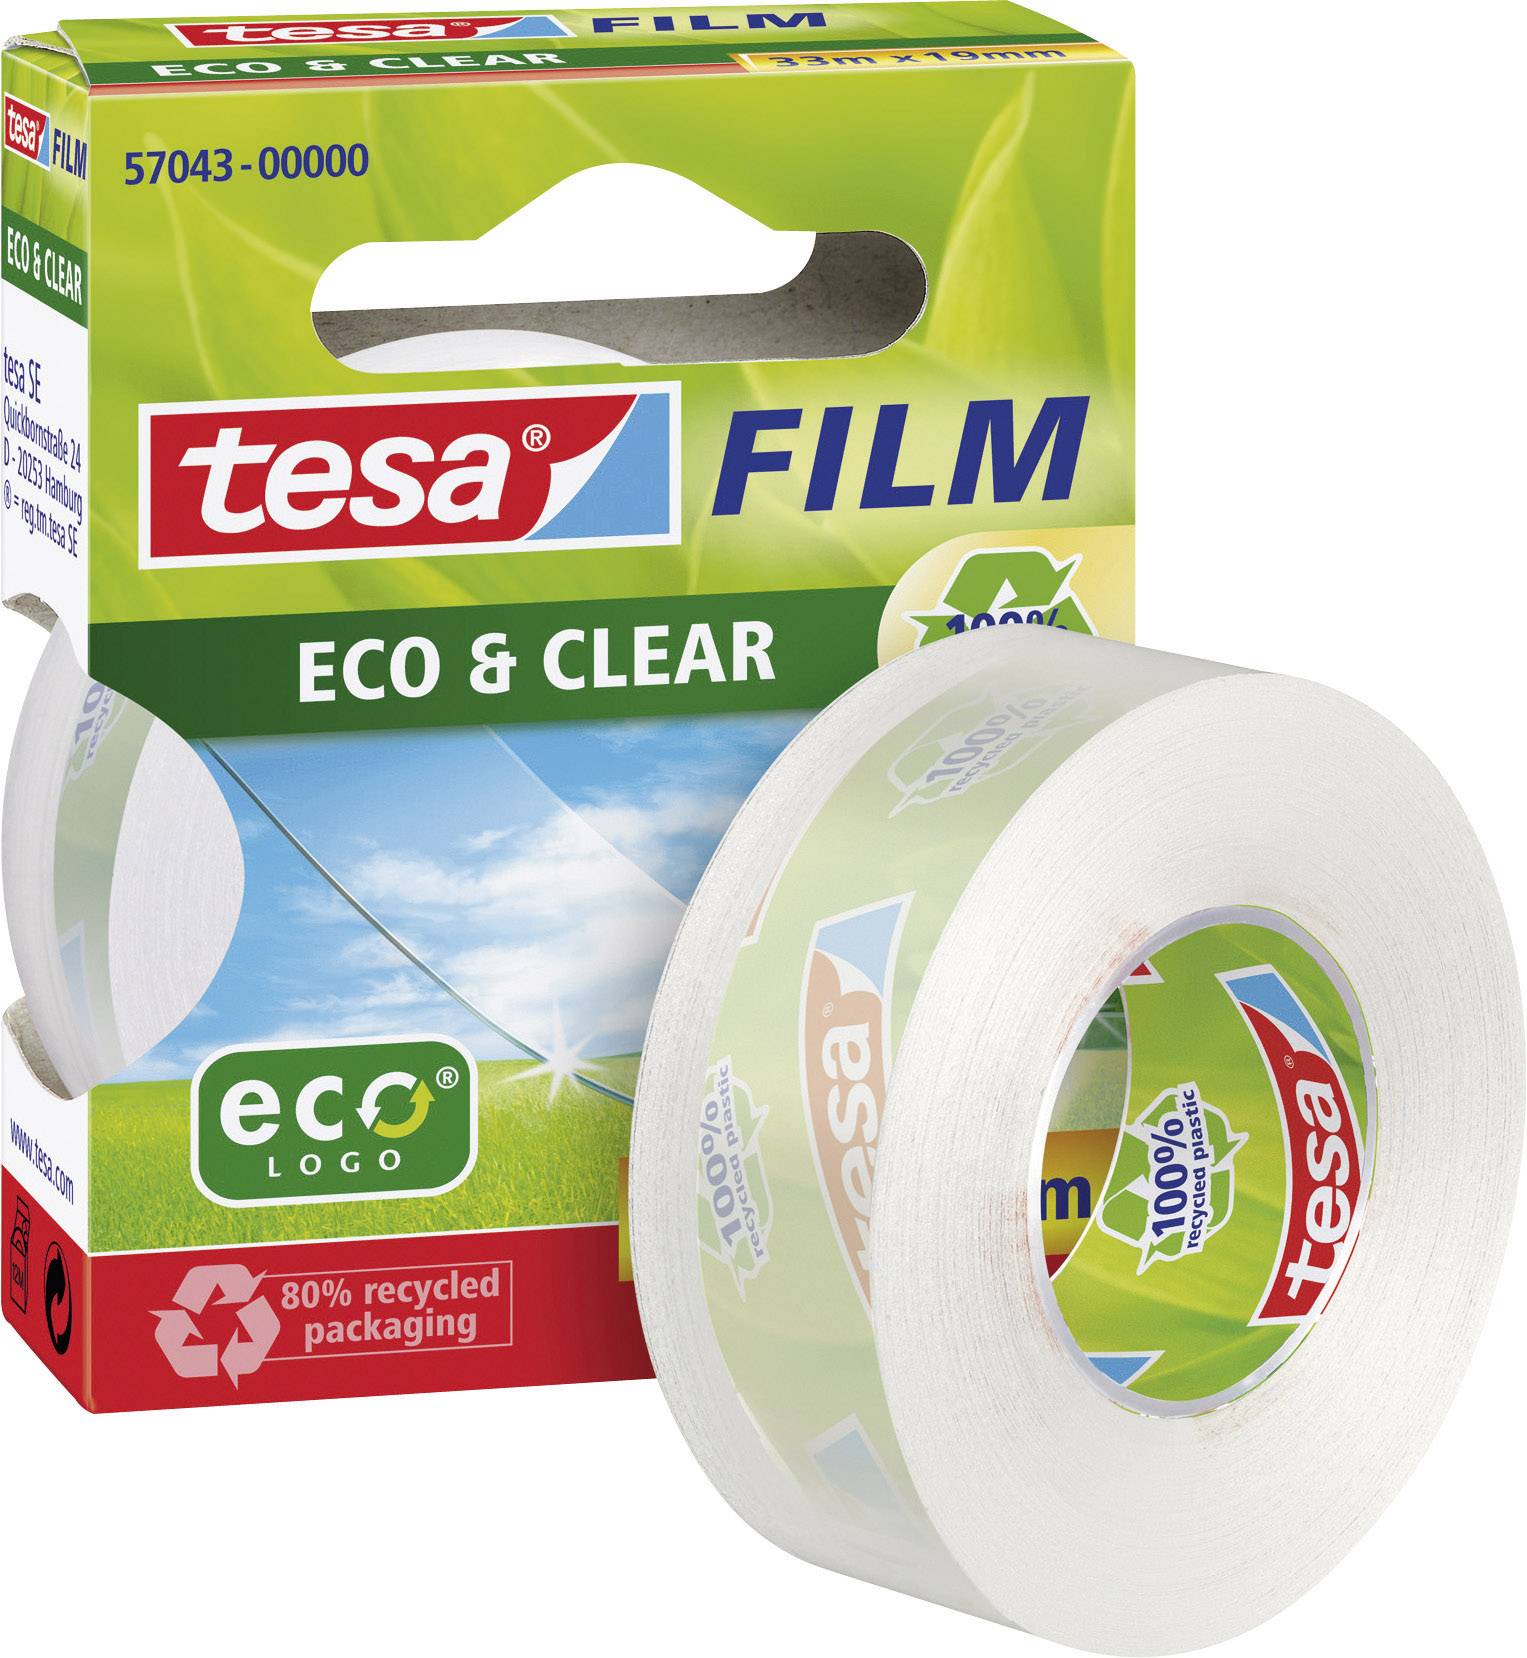 Eco & Clear Double Sided Tape